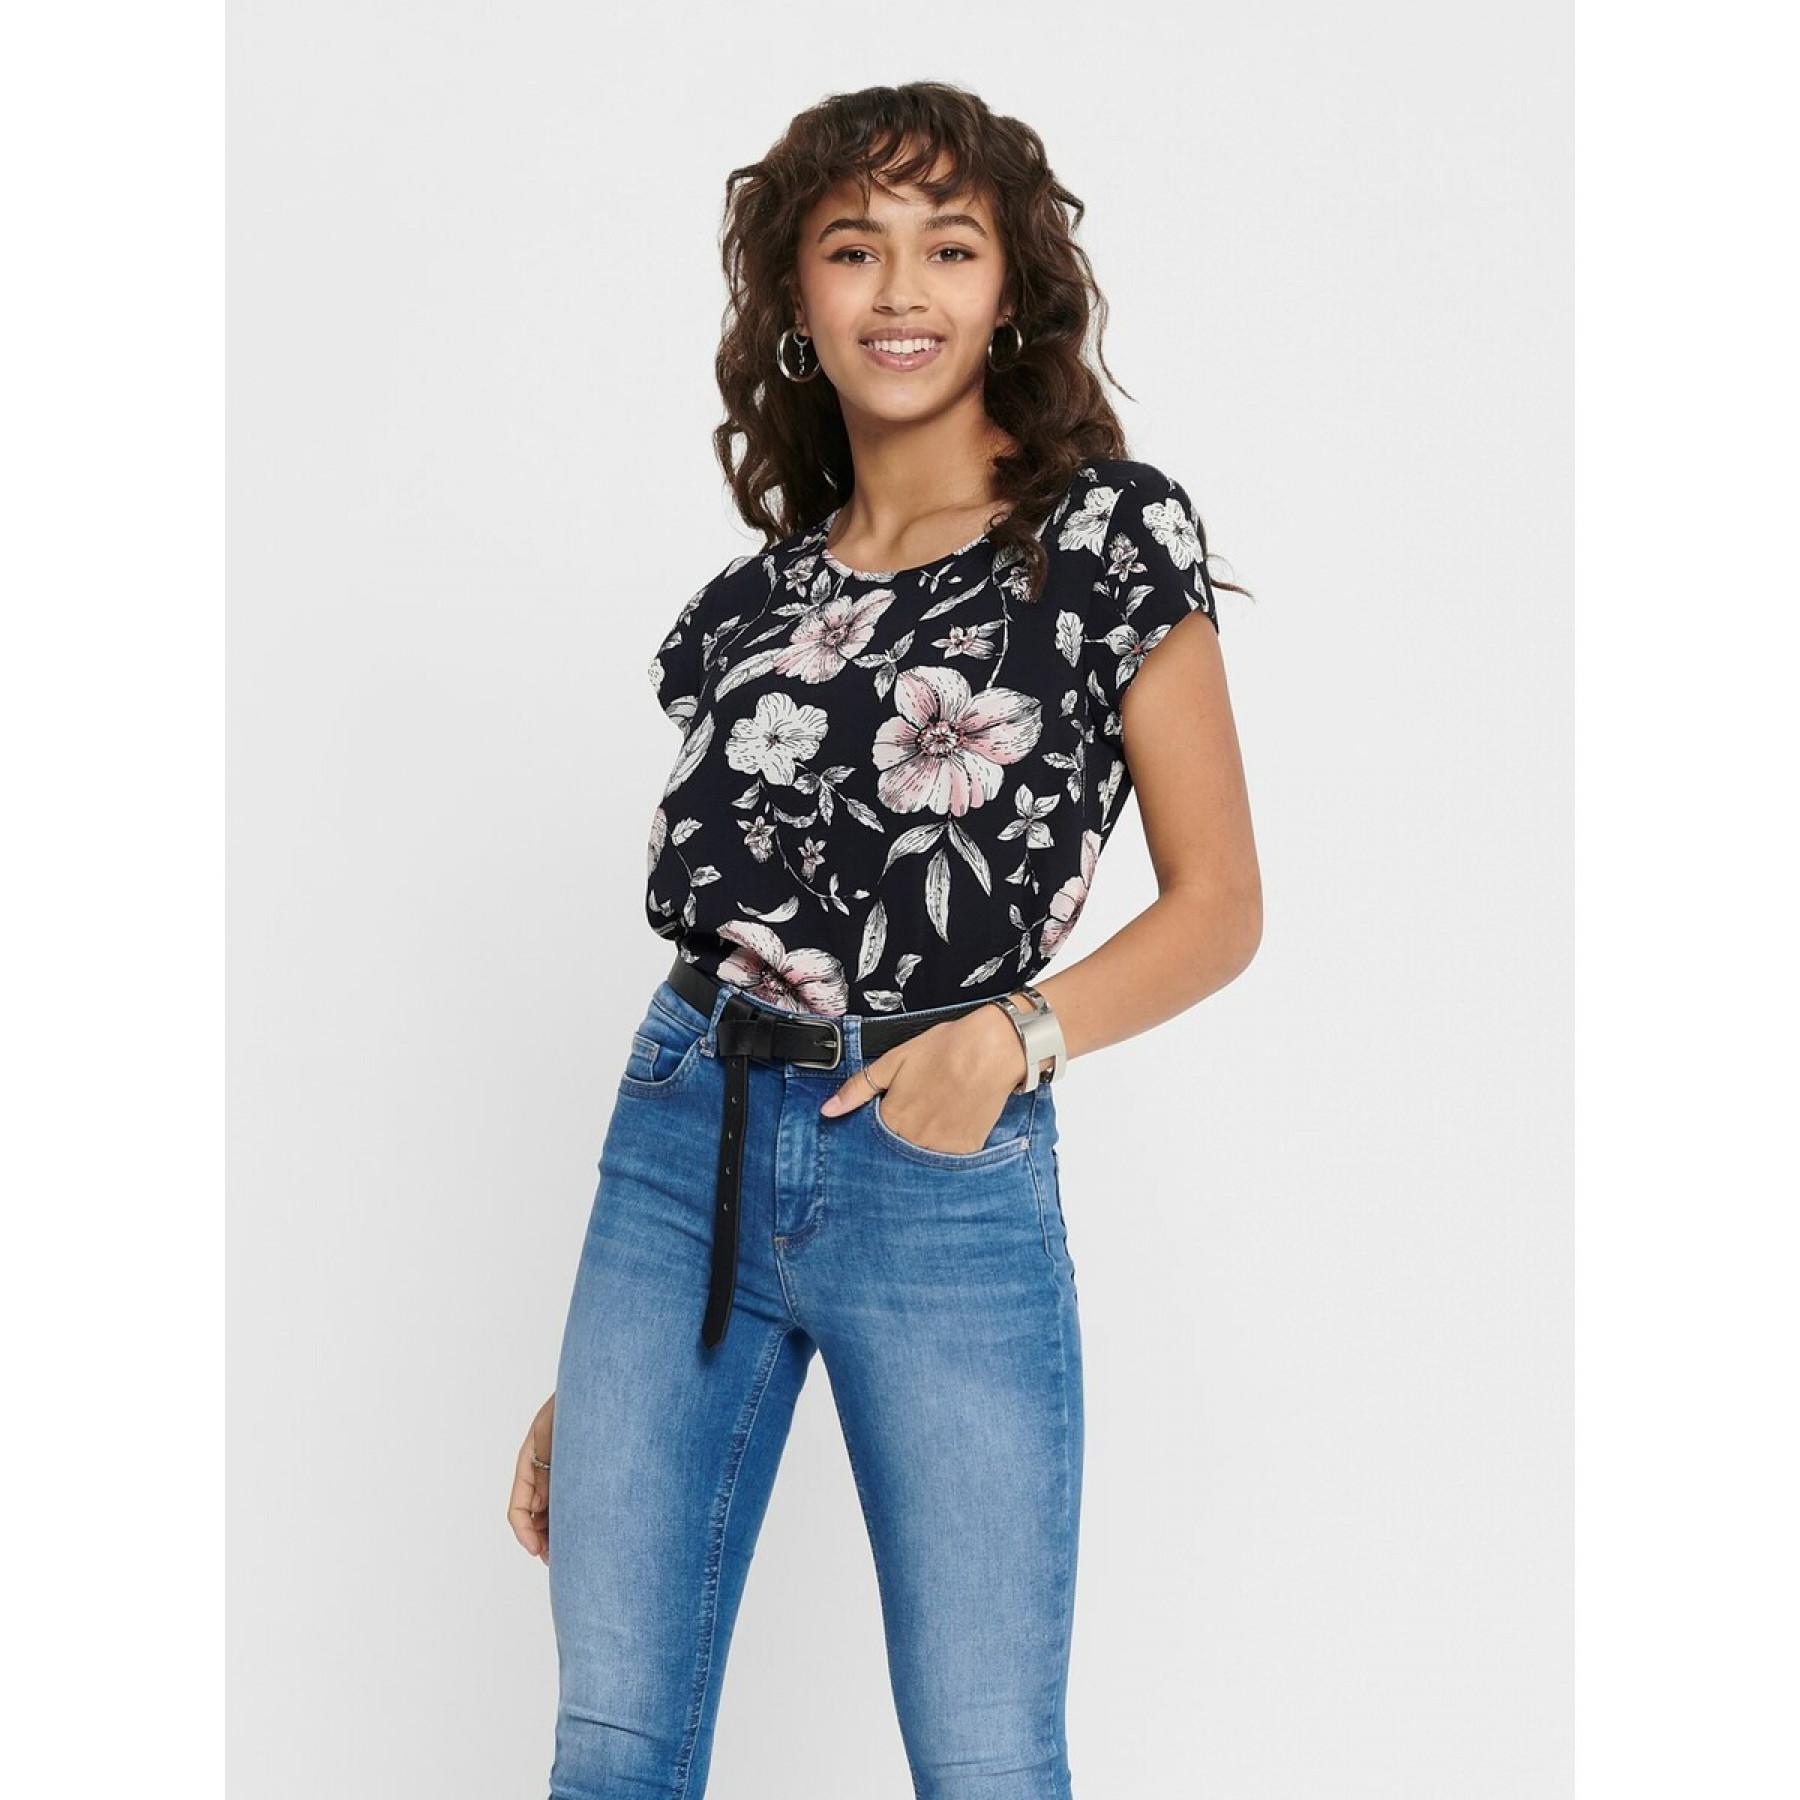 Women's top Only Vic manches courtes